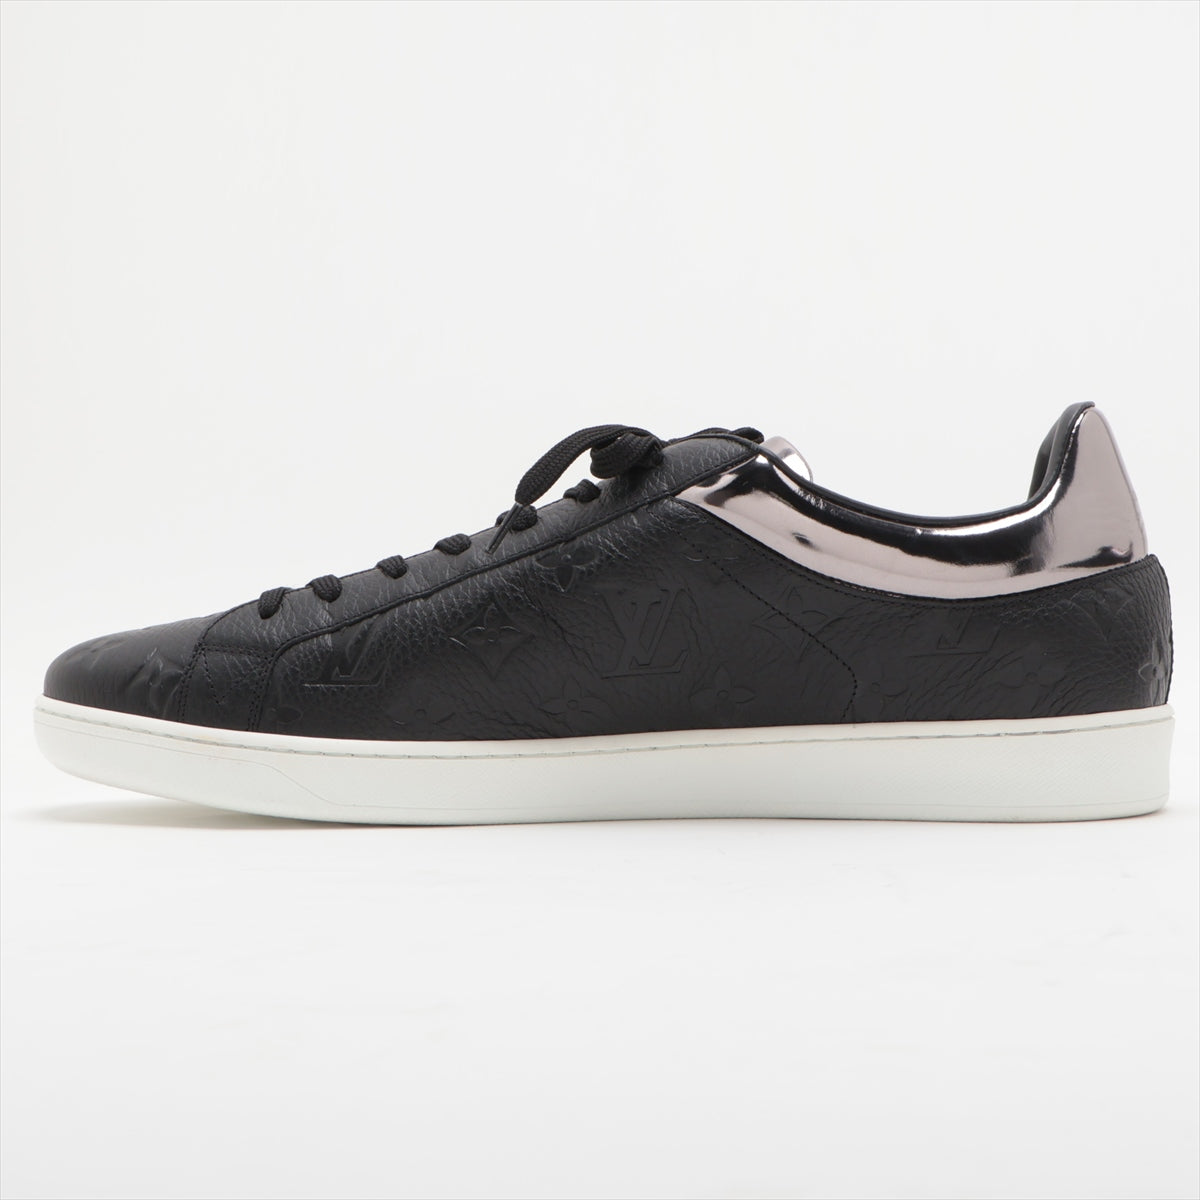 Louis Vuitton Luxembourg line 20 years Leather & patent Sneakers 12 Men's Black × Silver MS0230 Monogram